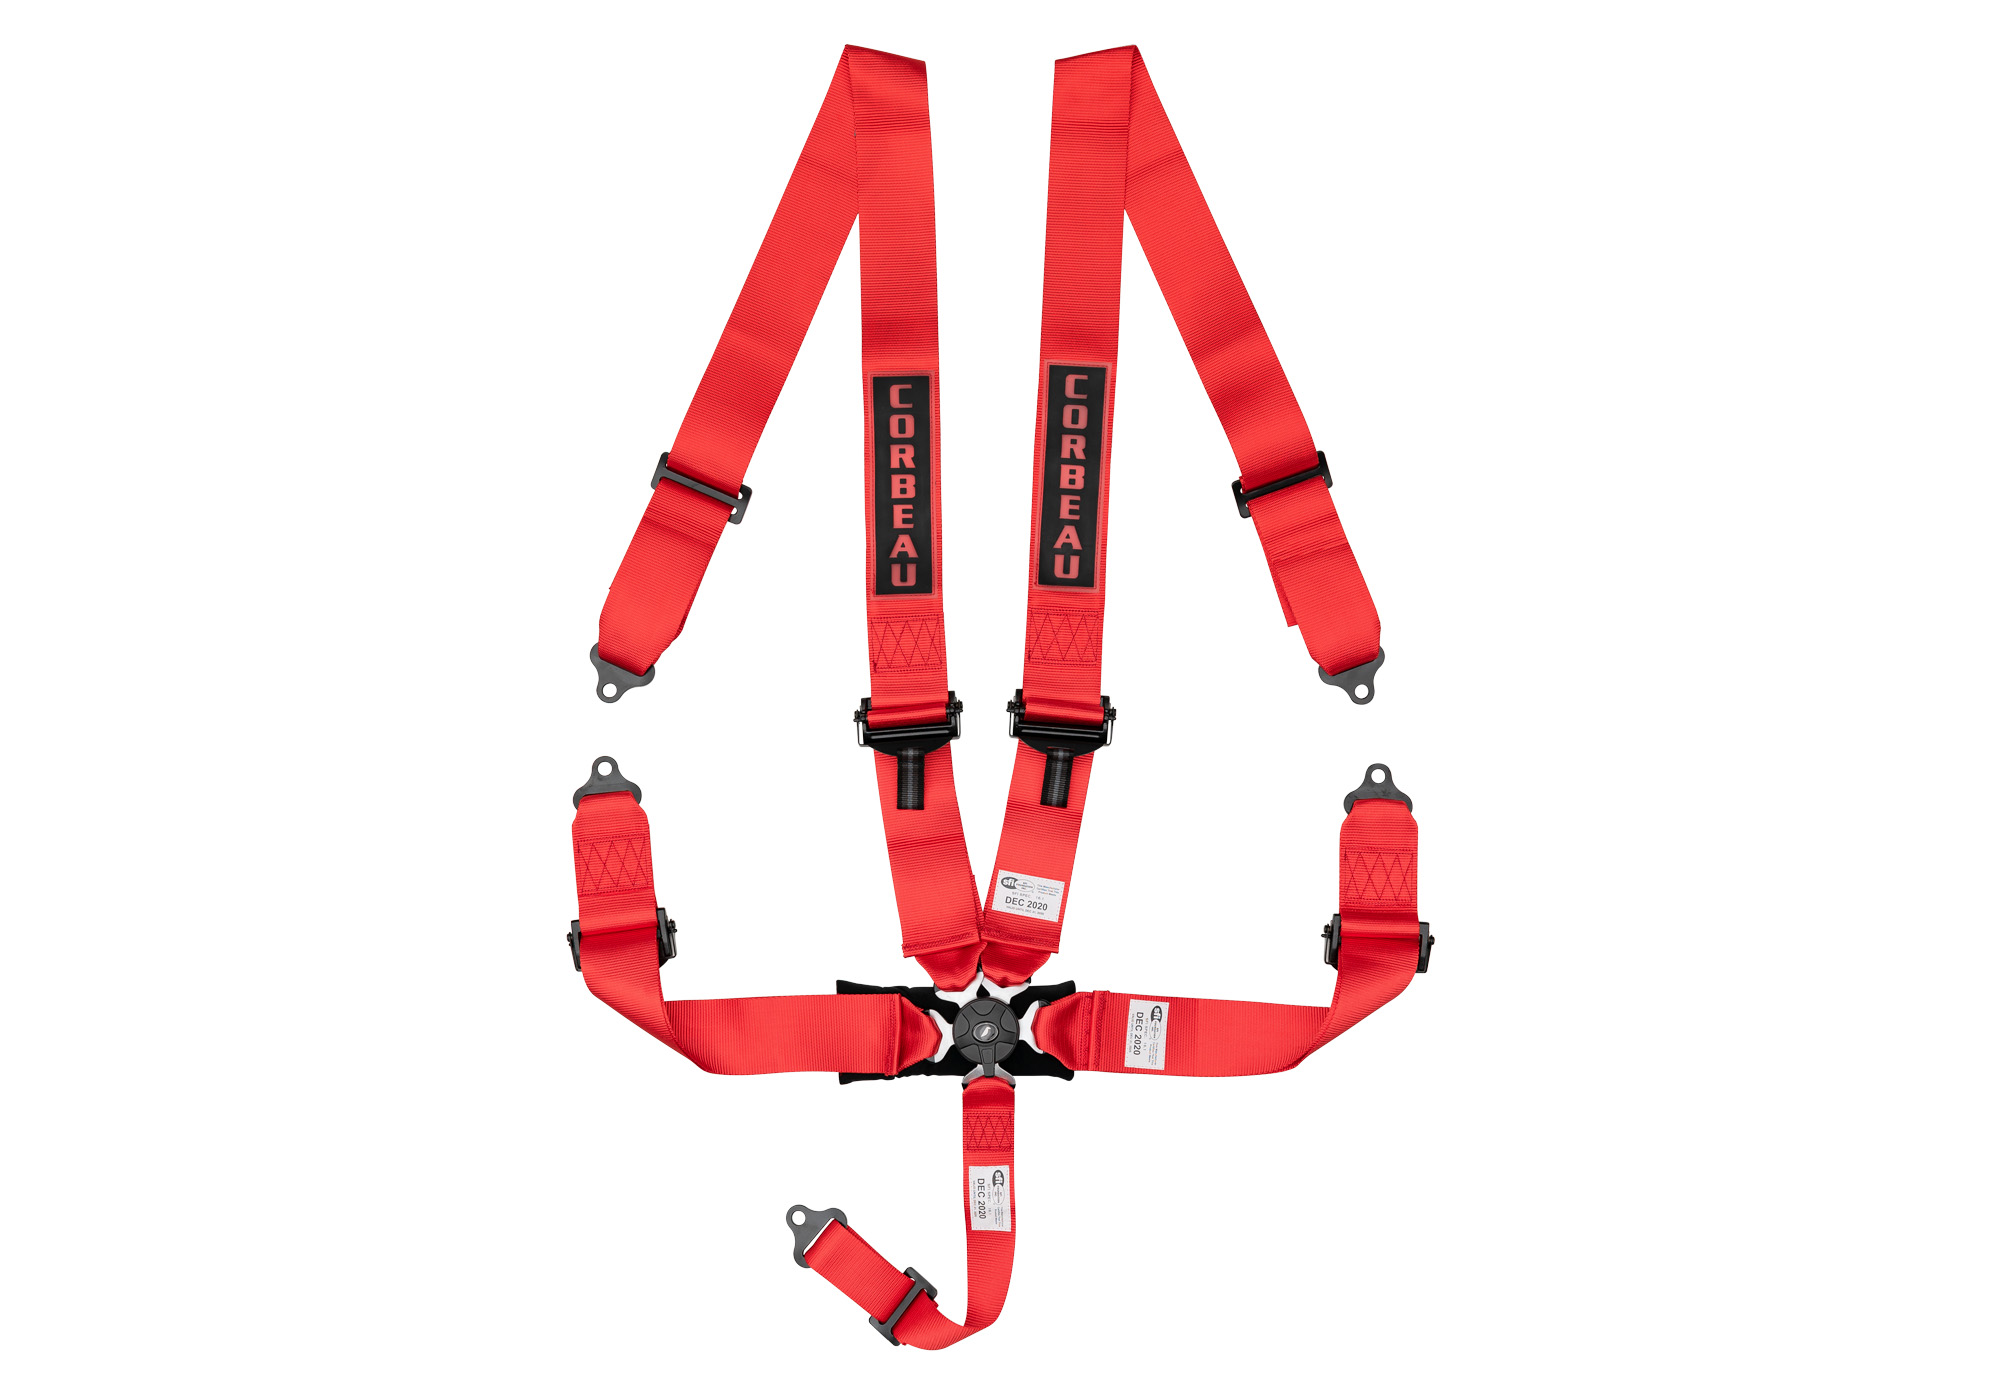 Corbeau 3-Inch Racing Harness Belts, Red 5-Point Camlock, 53007B